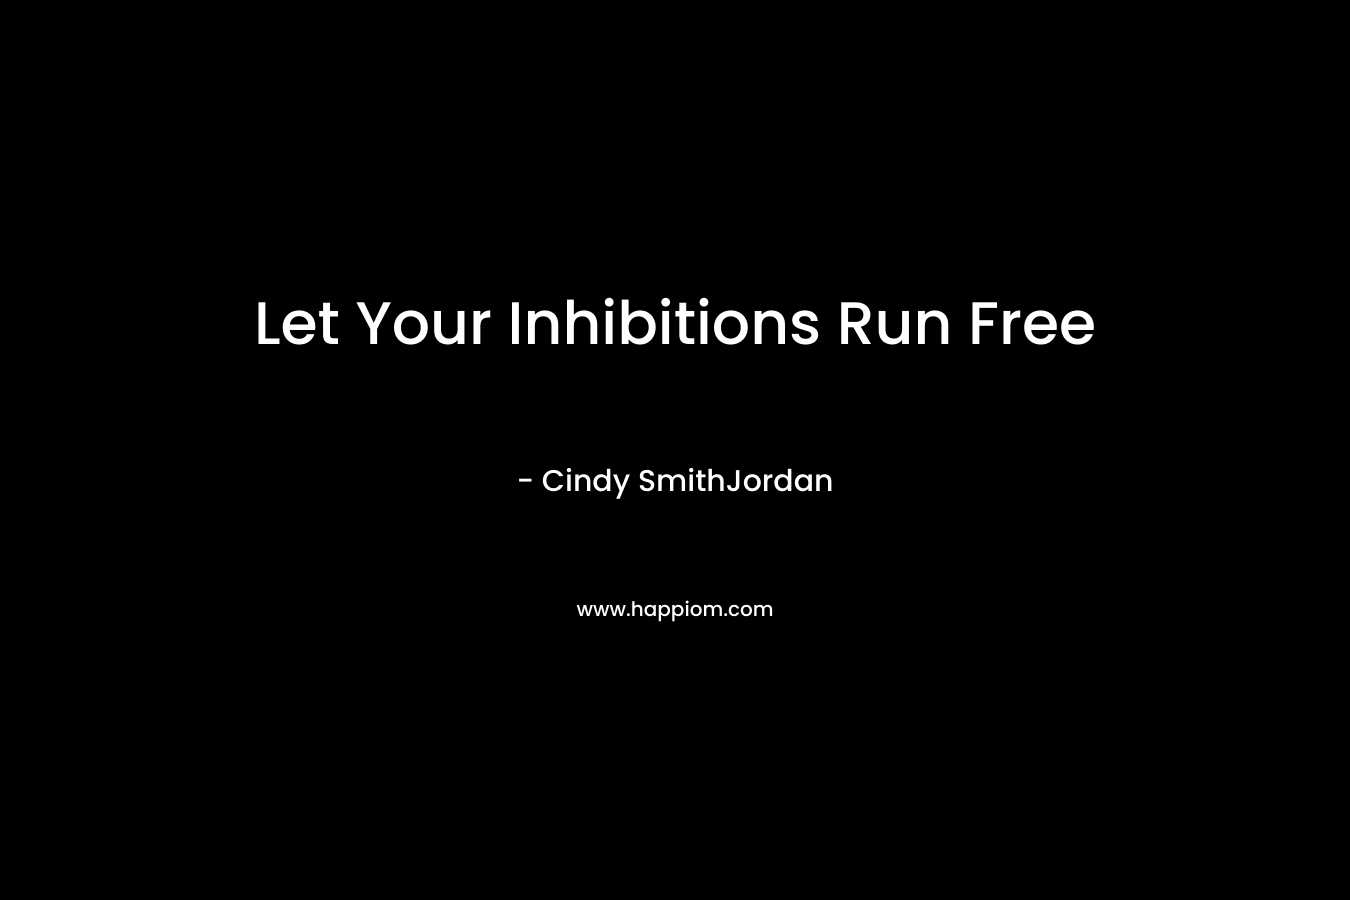 Let Your Inhibitions Run Free